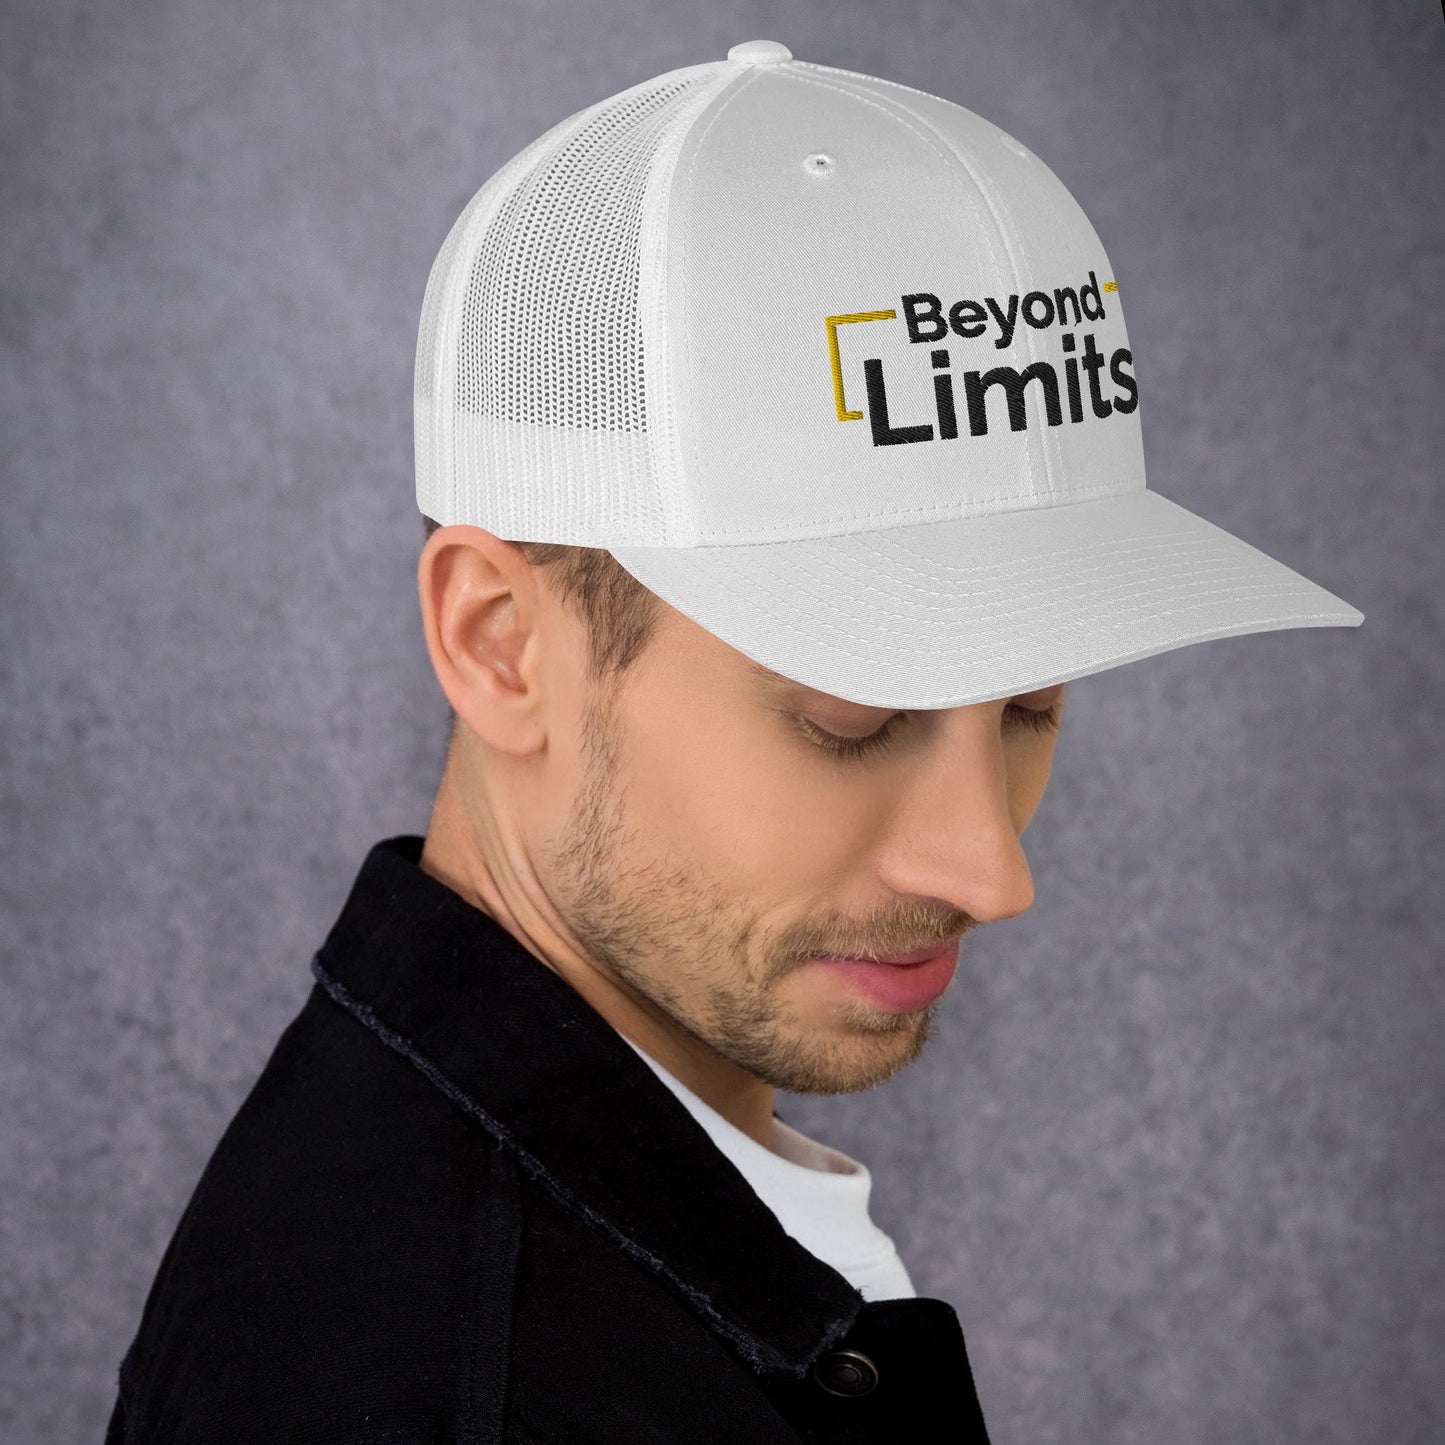 Beyond Limits: Classic Six-Panel Trucker Cap with Mesh Back